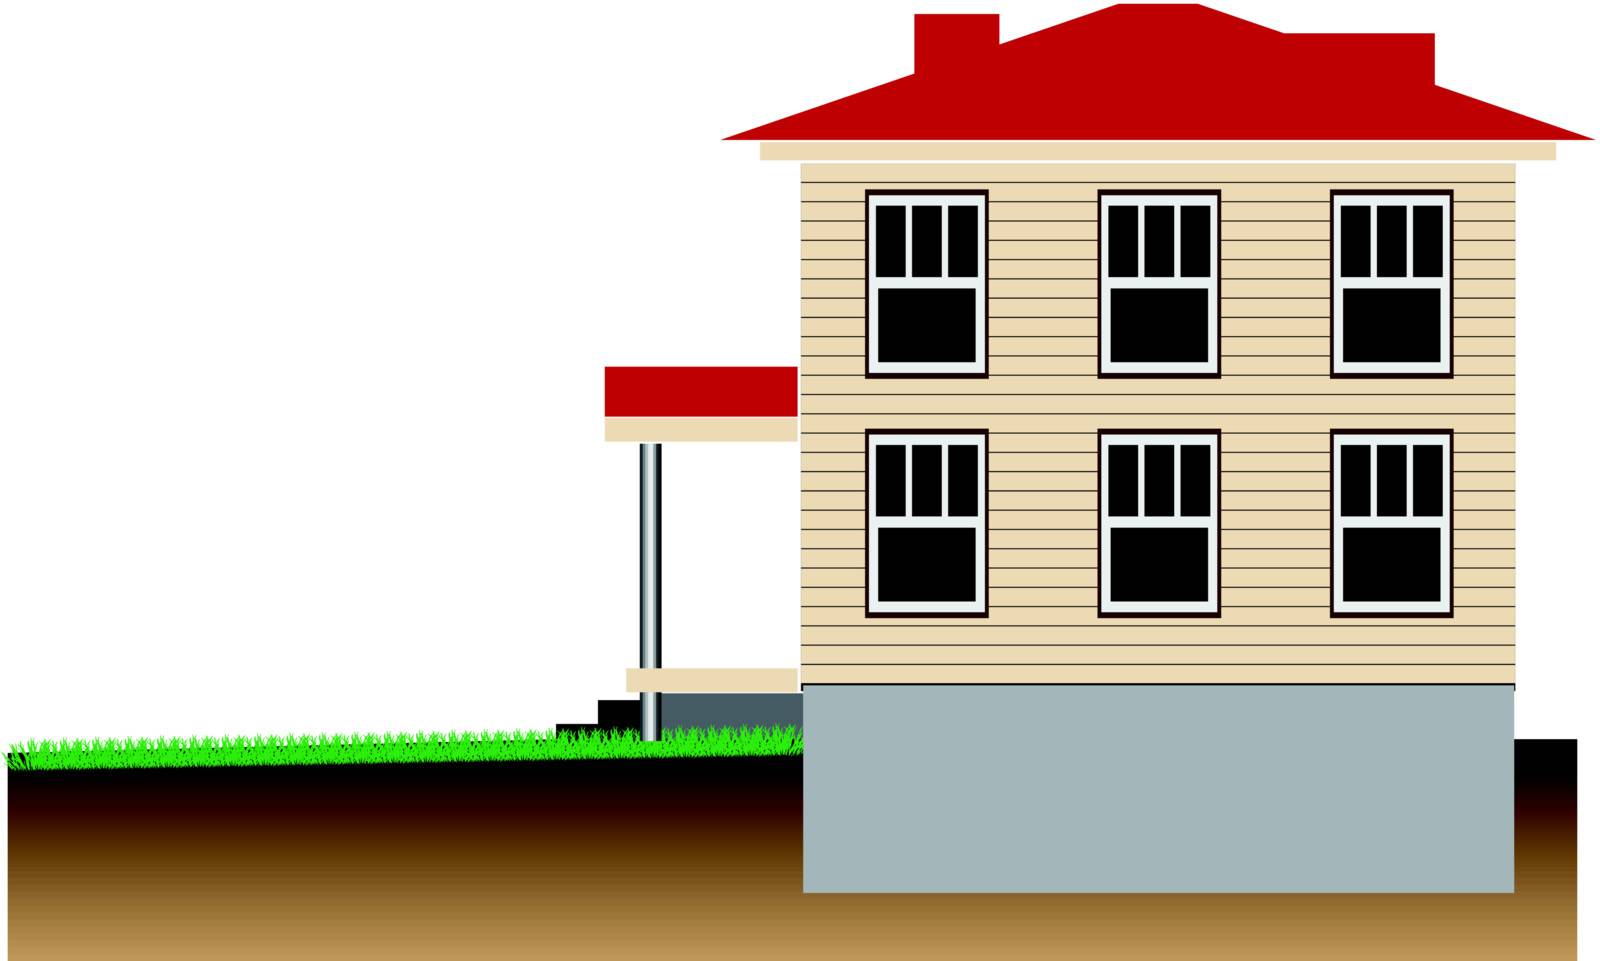 Residential house with a basement. Schematic representation. Vector illustration.